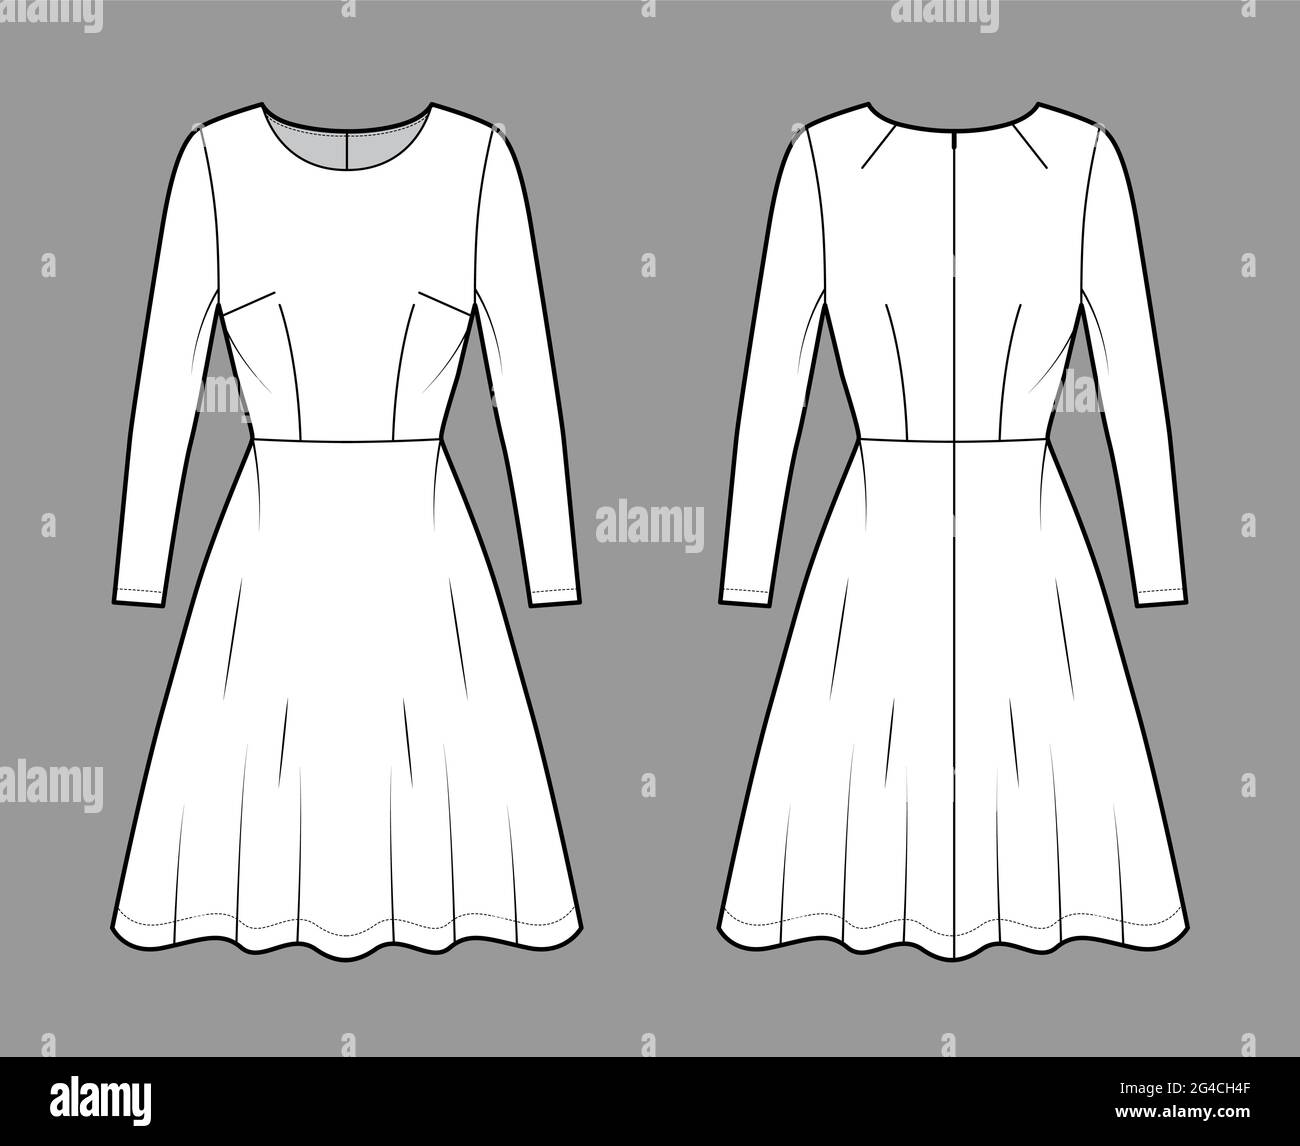 Dress flared skater technical fashion illustration with long sleeves, fitted body, knee length semi-circular skirt. Flat apparel front, back, white co Stock Vector